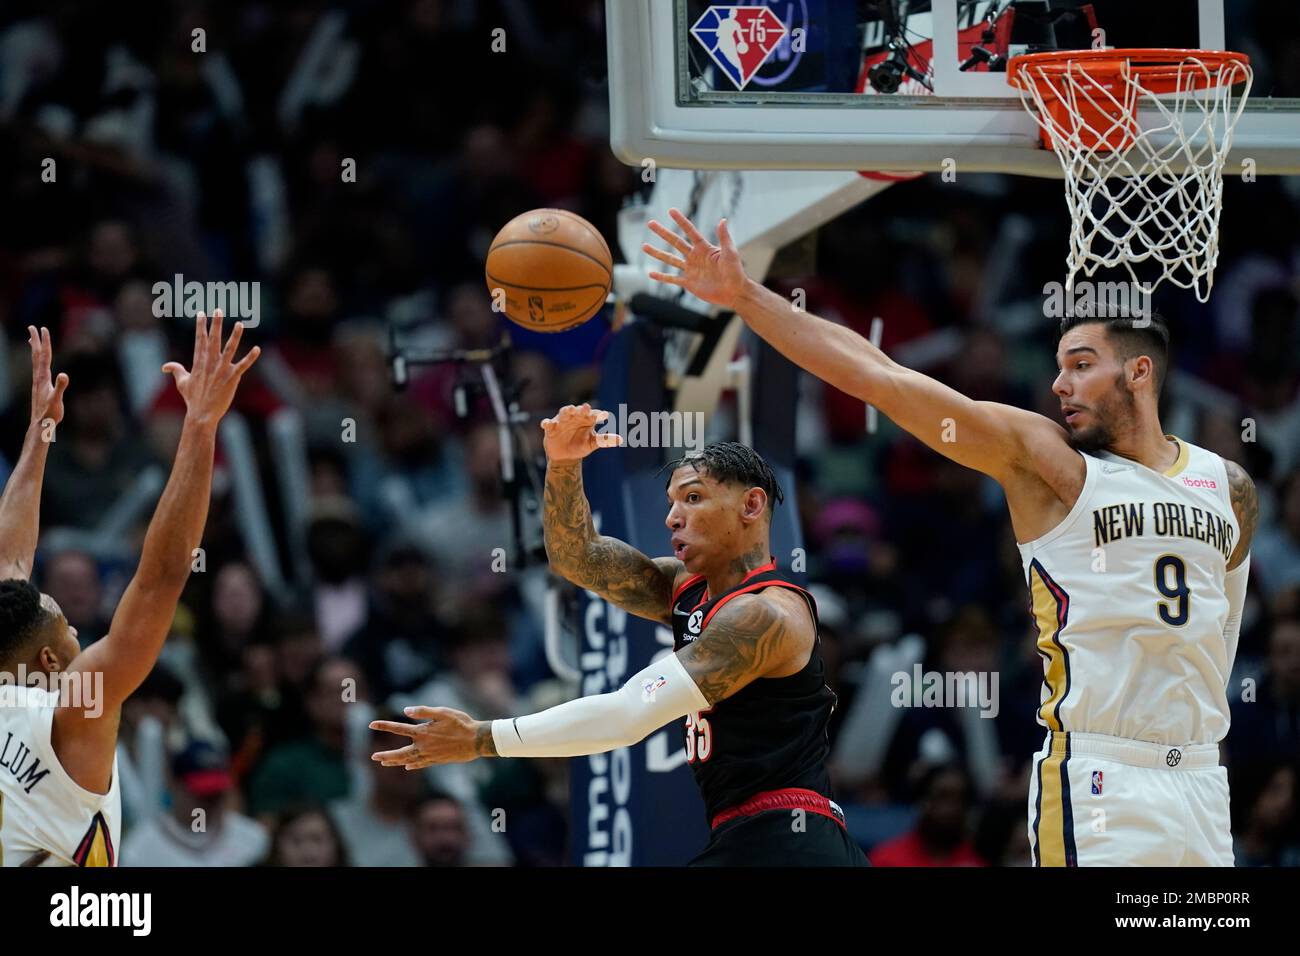 Portland Trail Blazers forward Didi Louzada (35) moves the ball down court  in the first half of an NBA basketball game against the New Orleans Pelicans  in New Orleans, Thursday, April 7